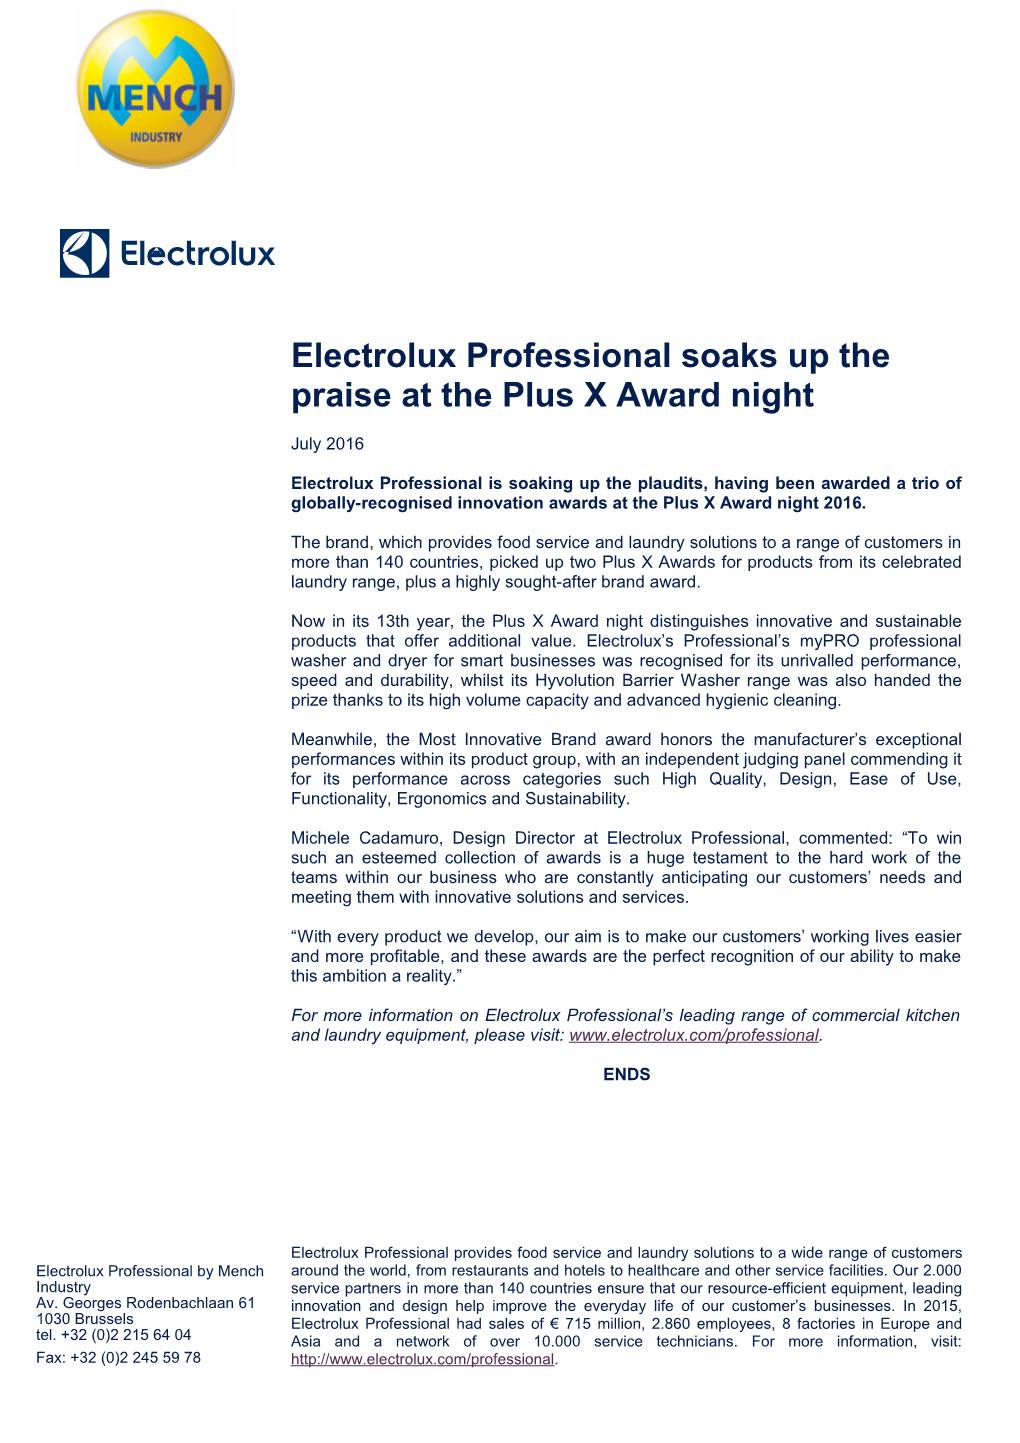 Electrolux Professional Soaks up the Praise at the Plus X Award Night